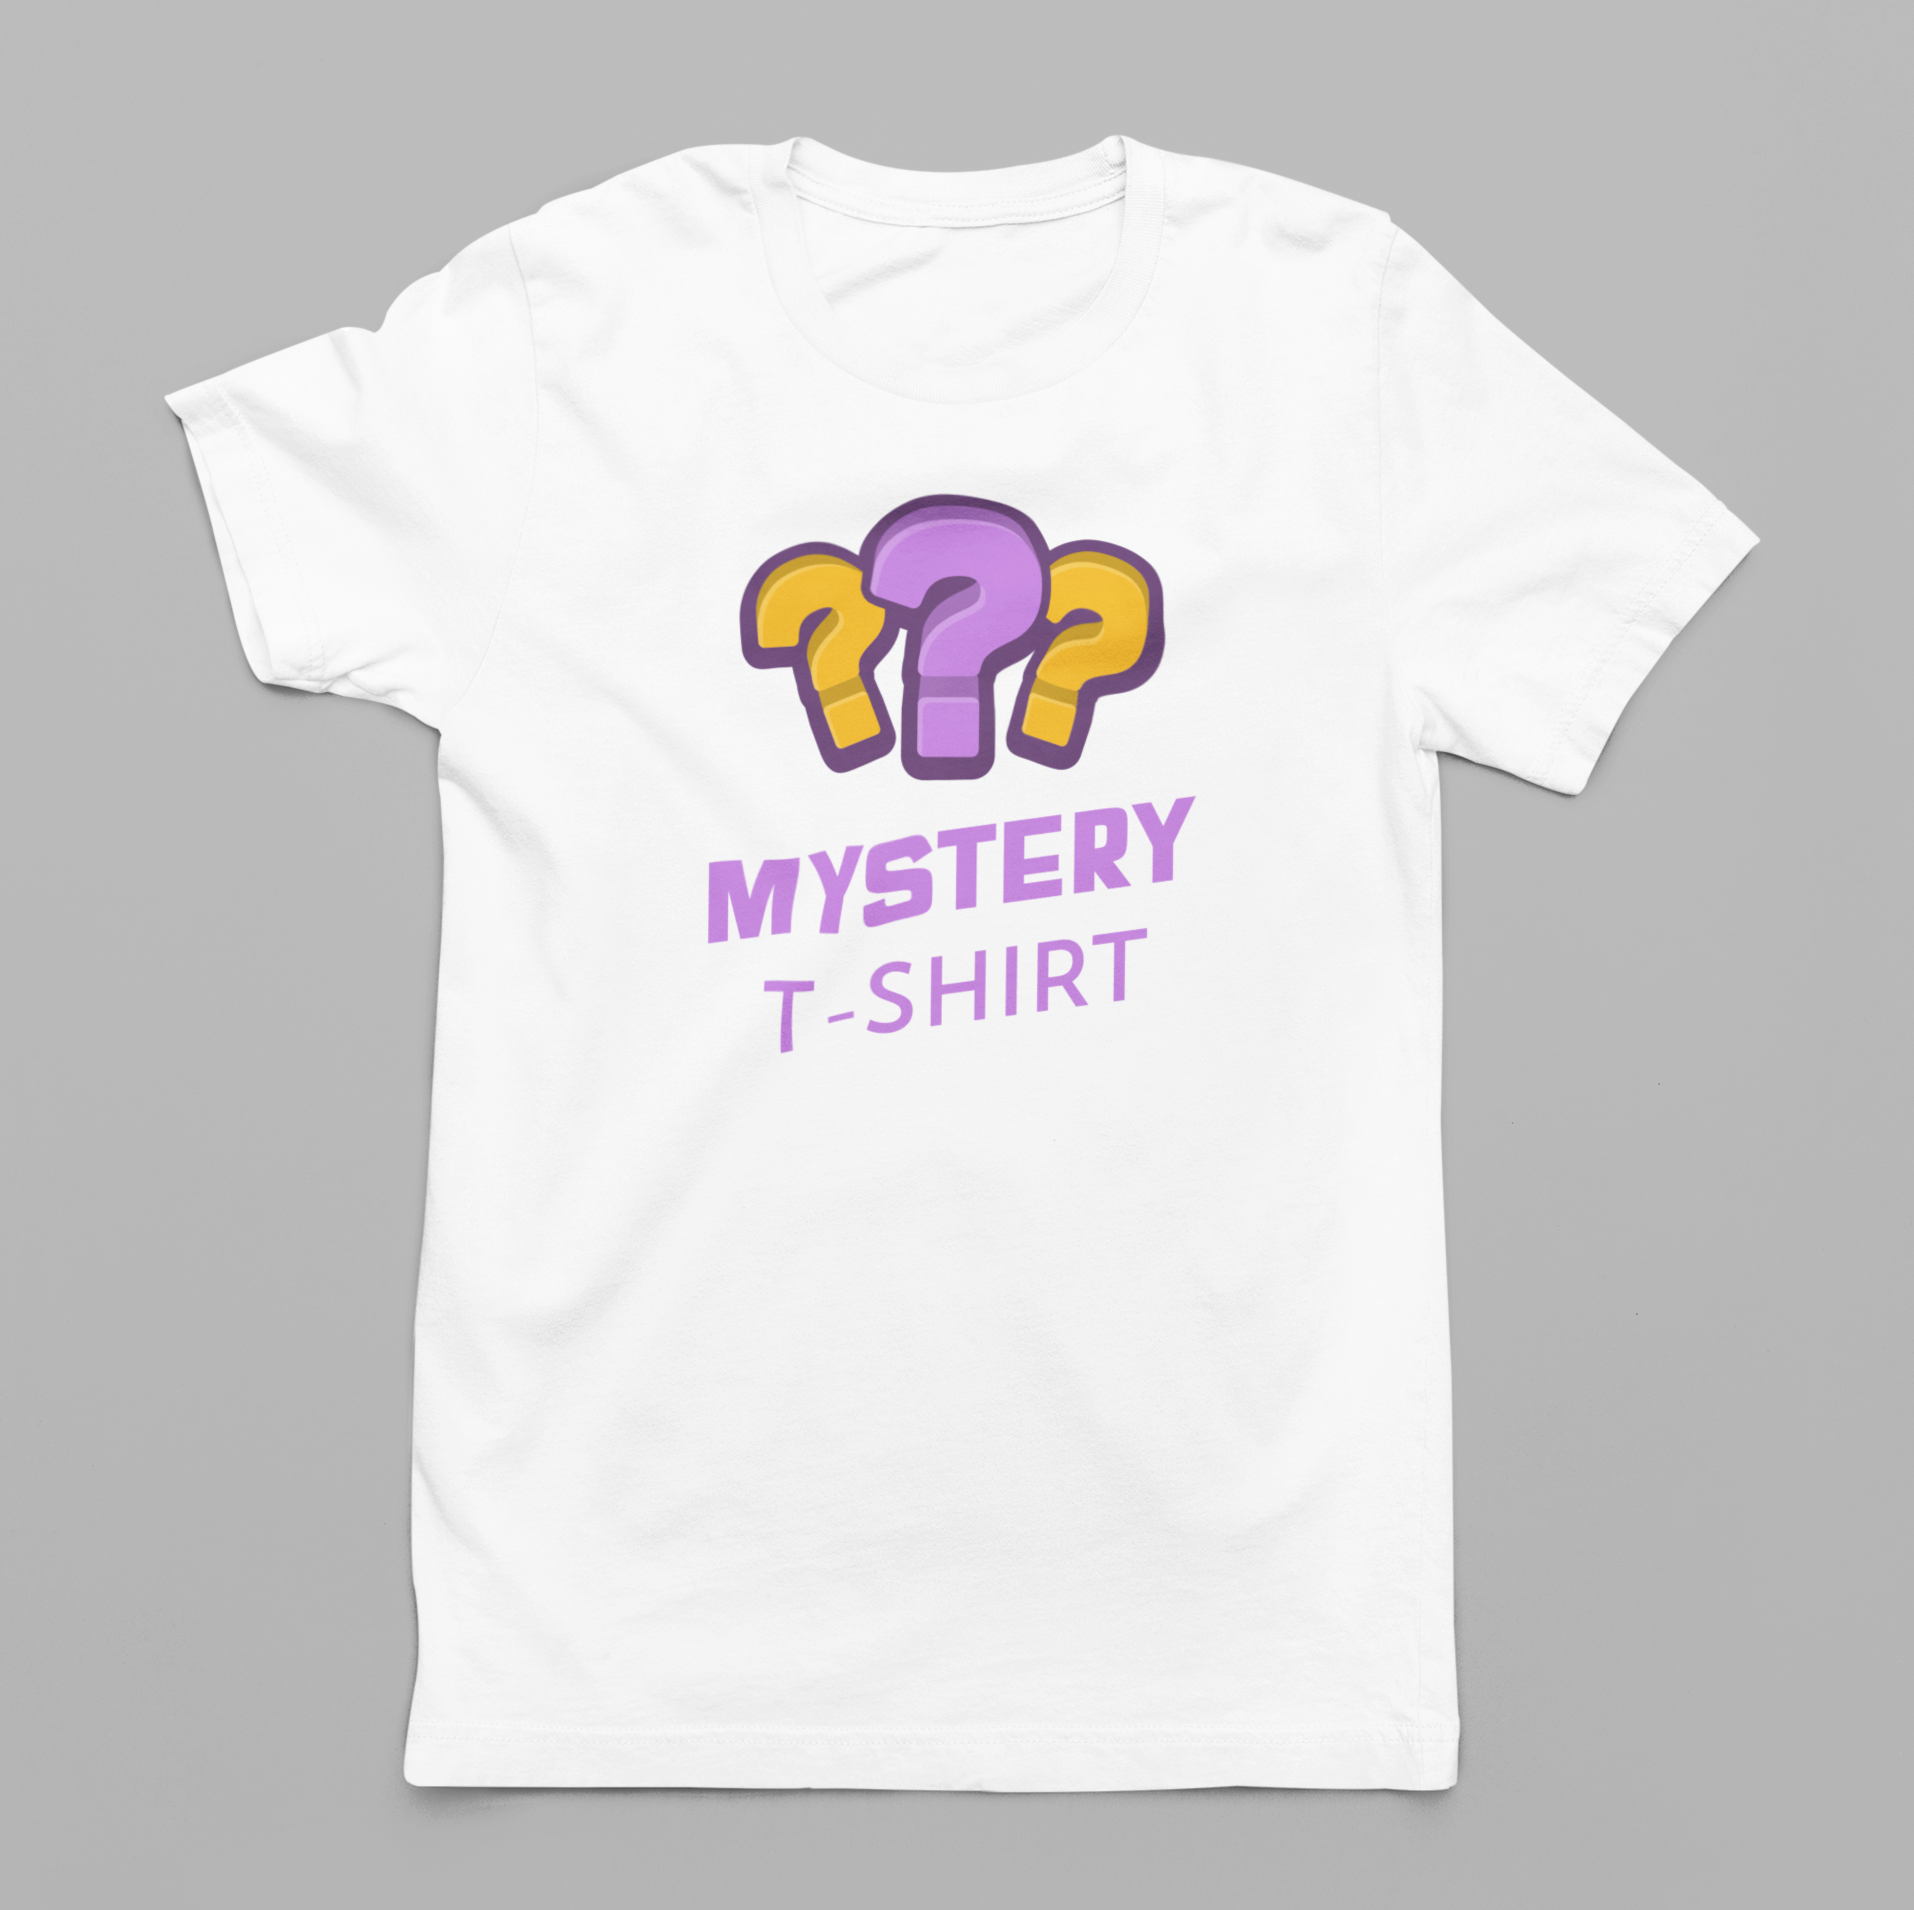 Mystery T-Shirt (Pick your size for a random design)